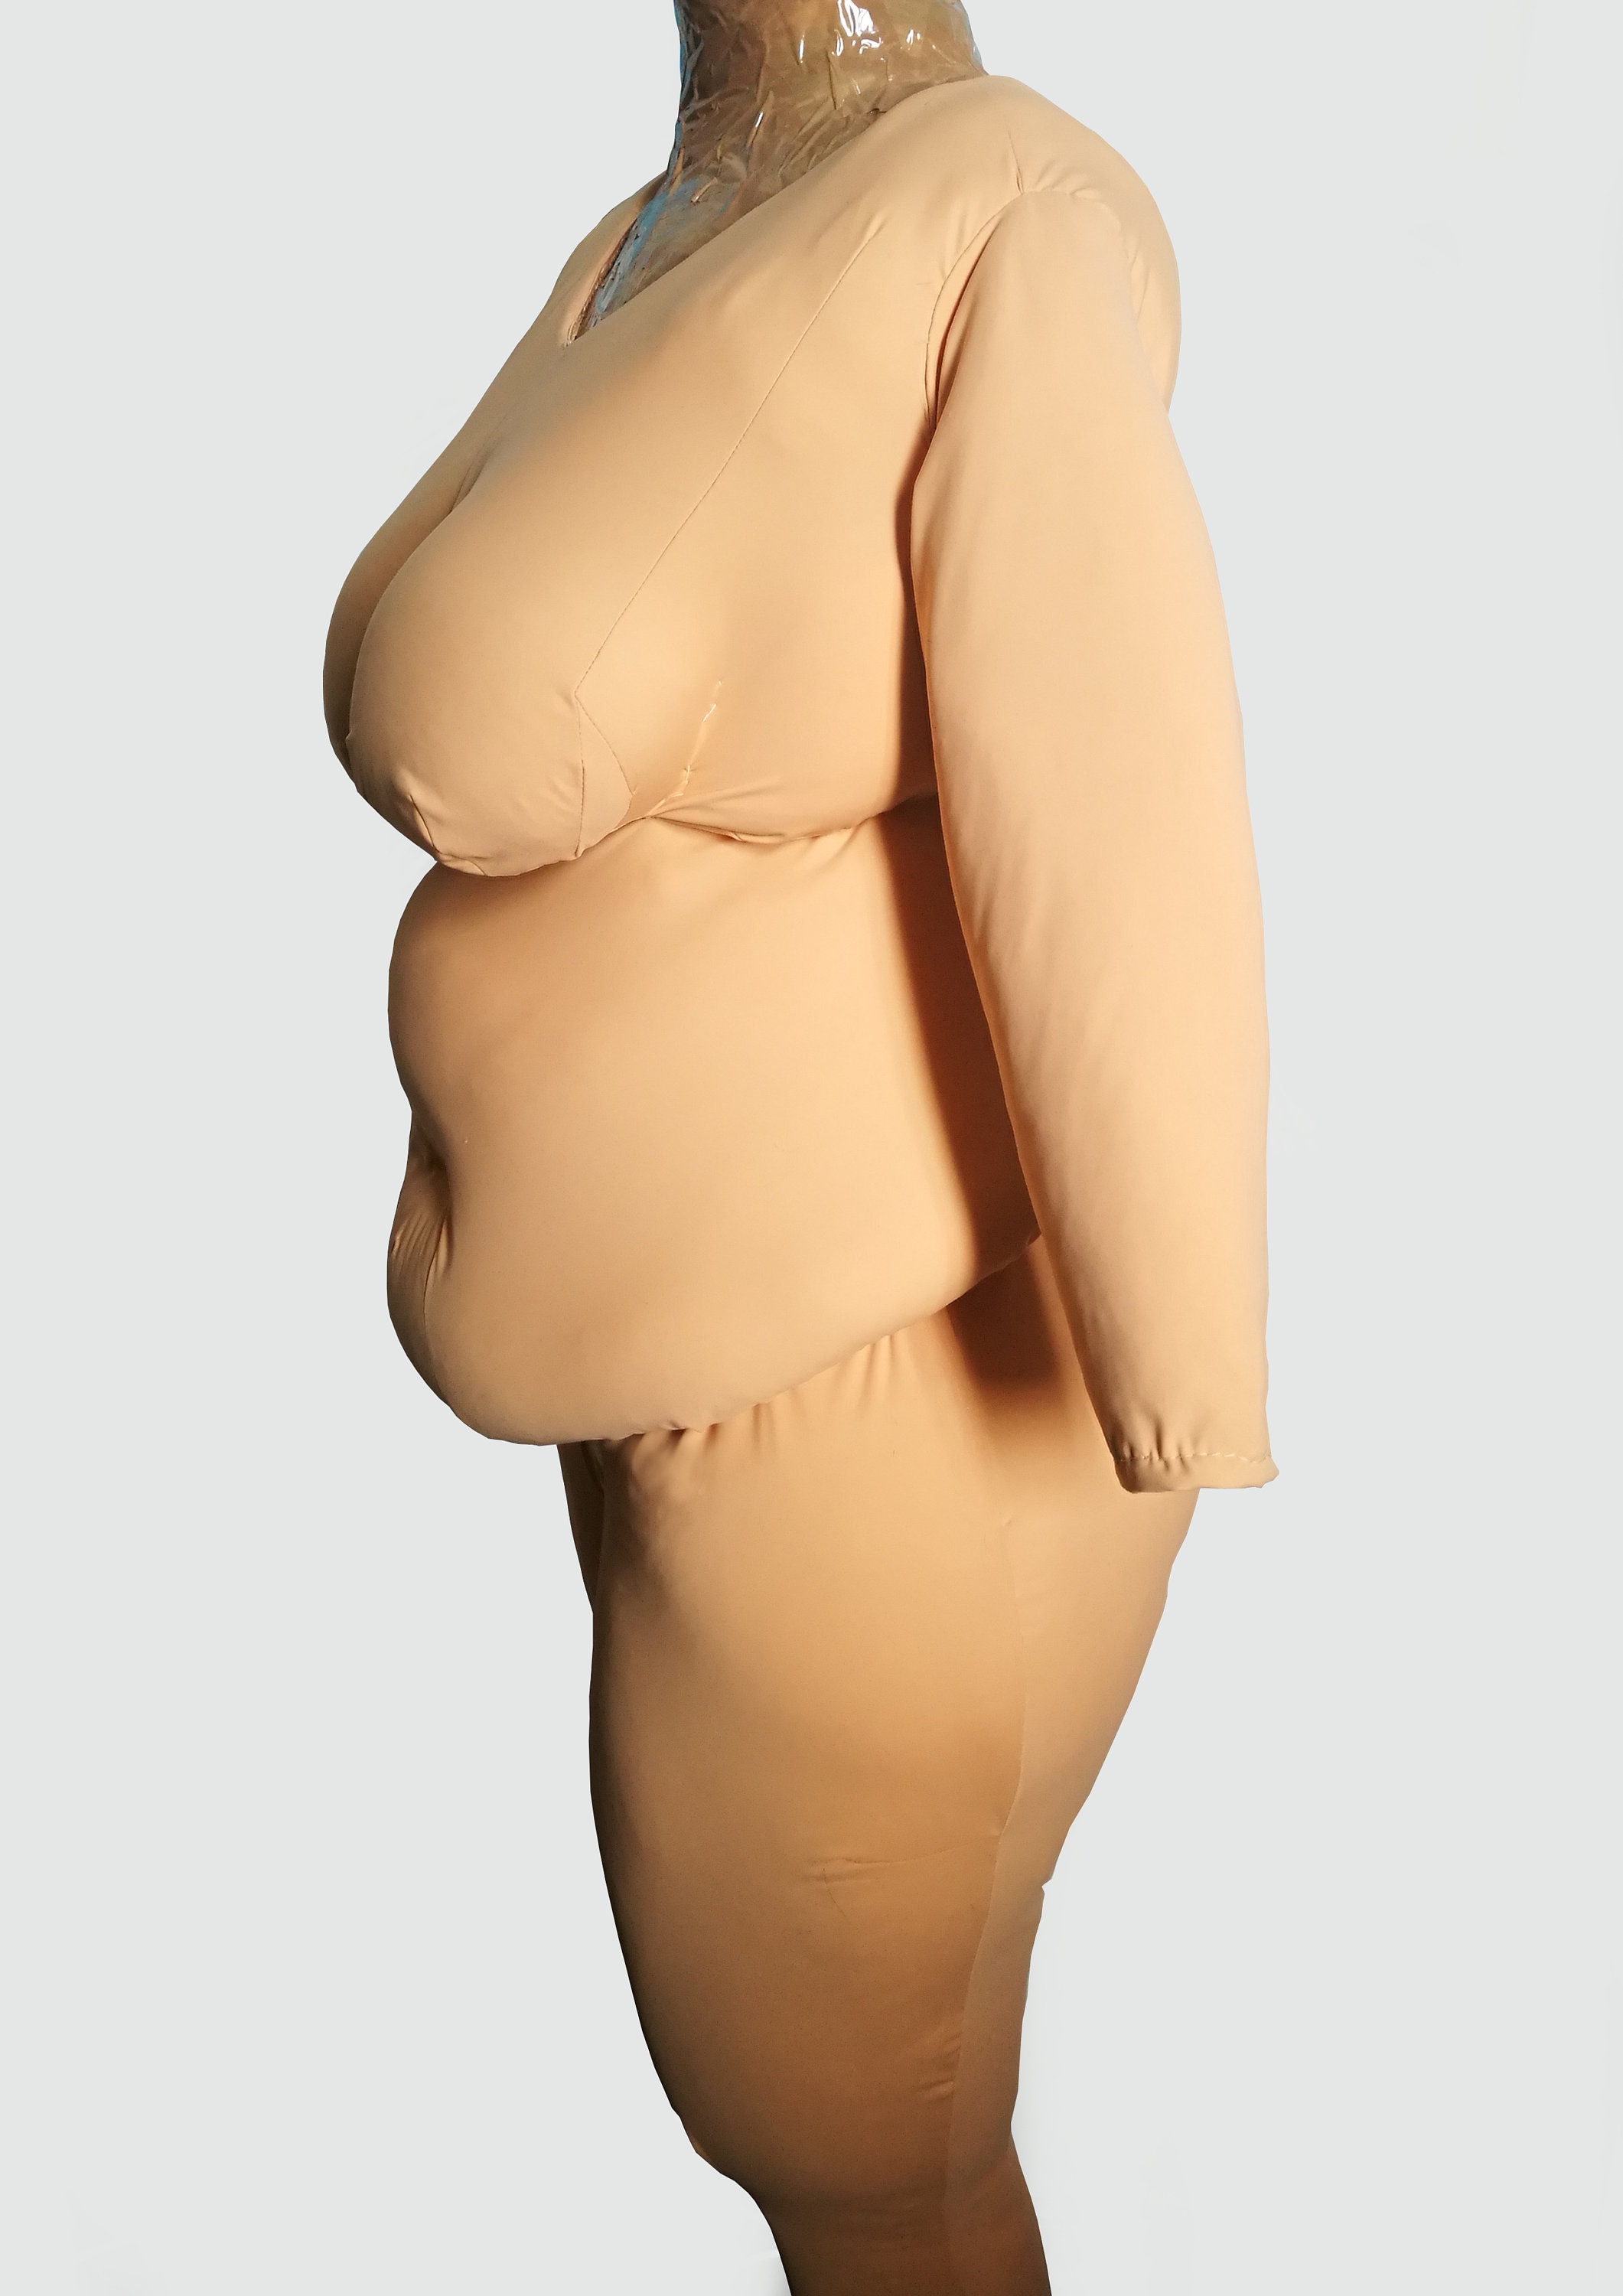 Adult Fat Suit Old Lady Saggy Boobs Costume PM539826 for sale online